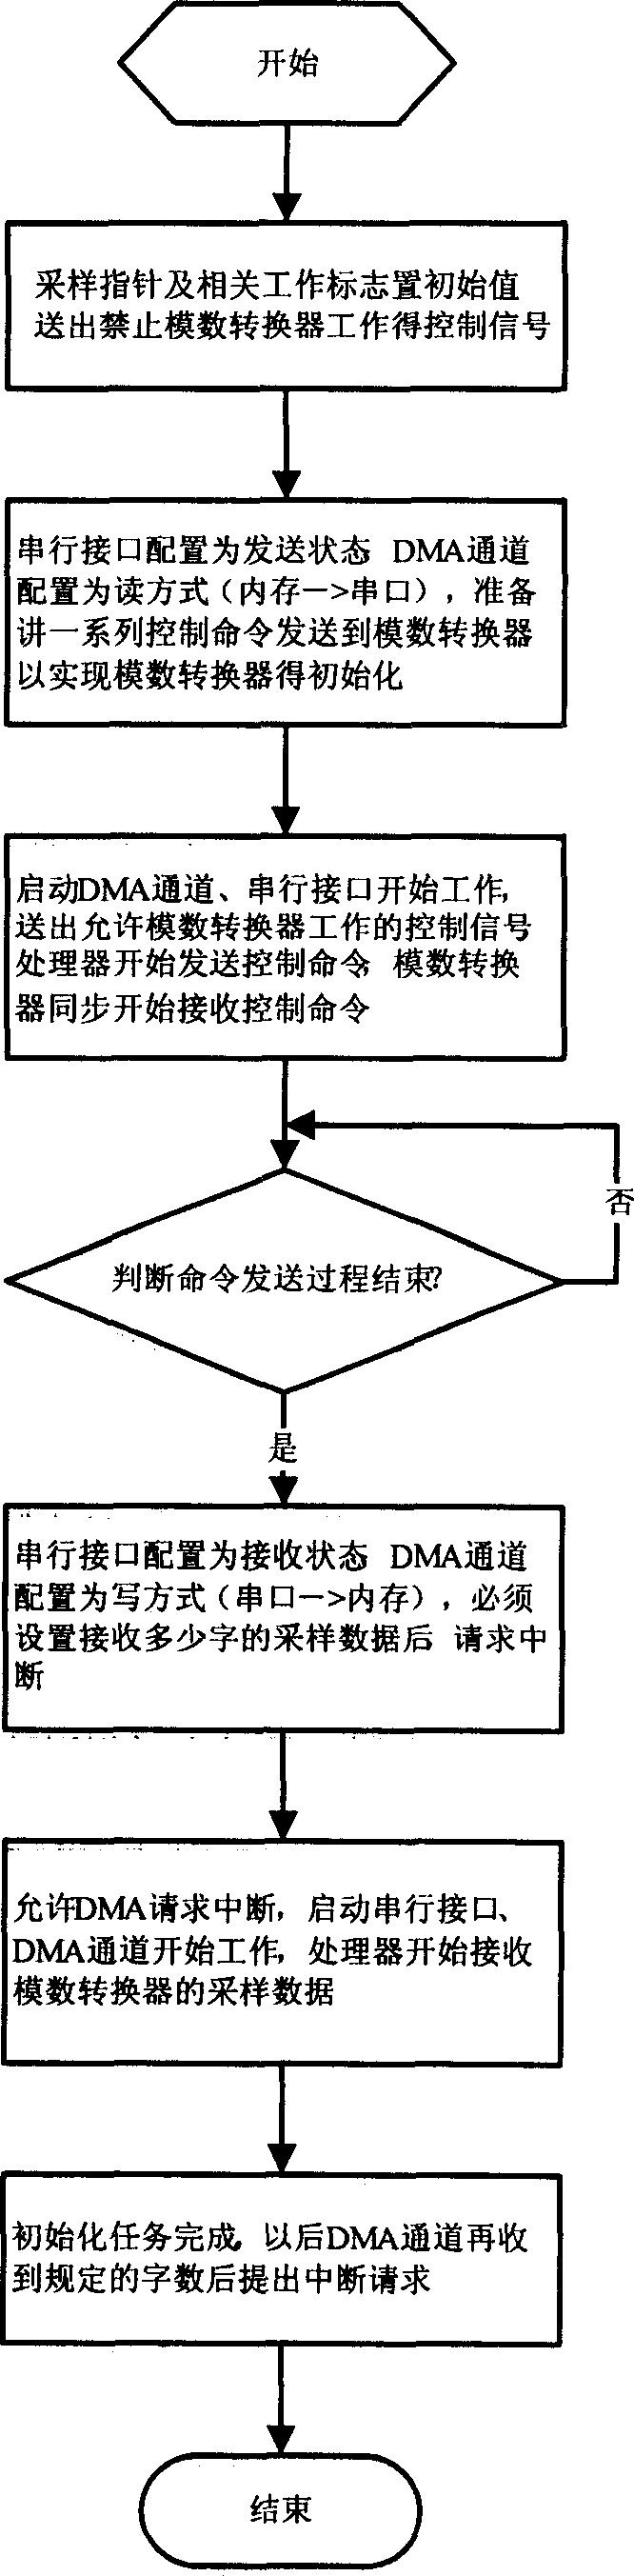 Sampling method and system for multi-channel analog signal